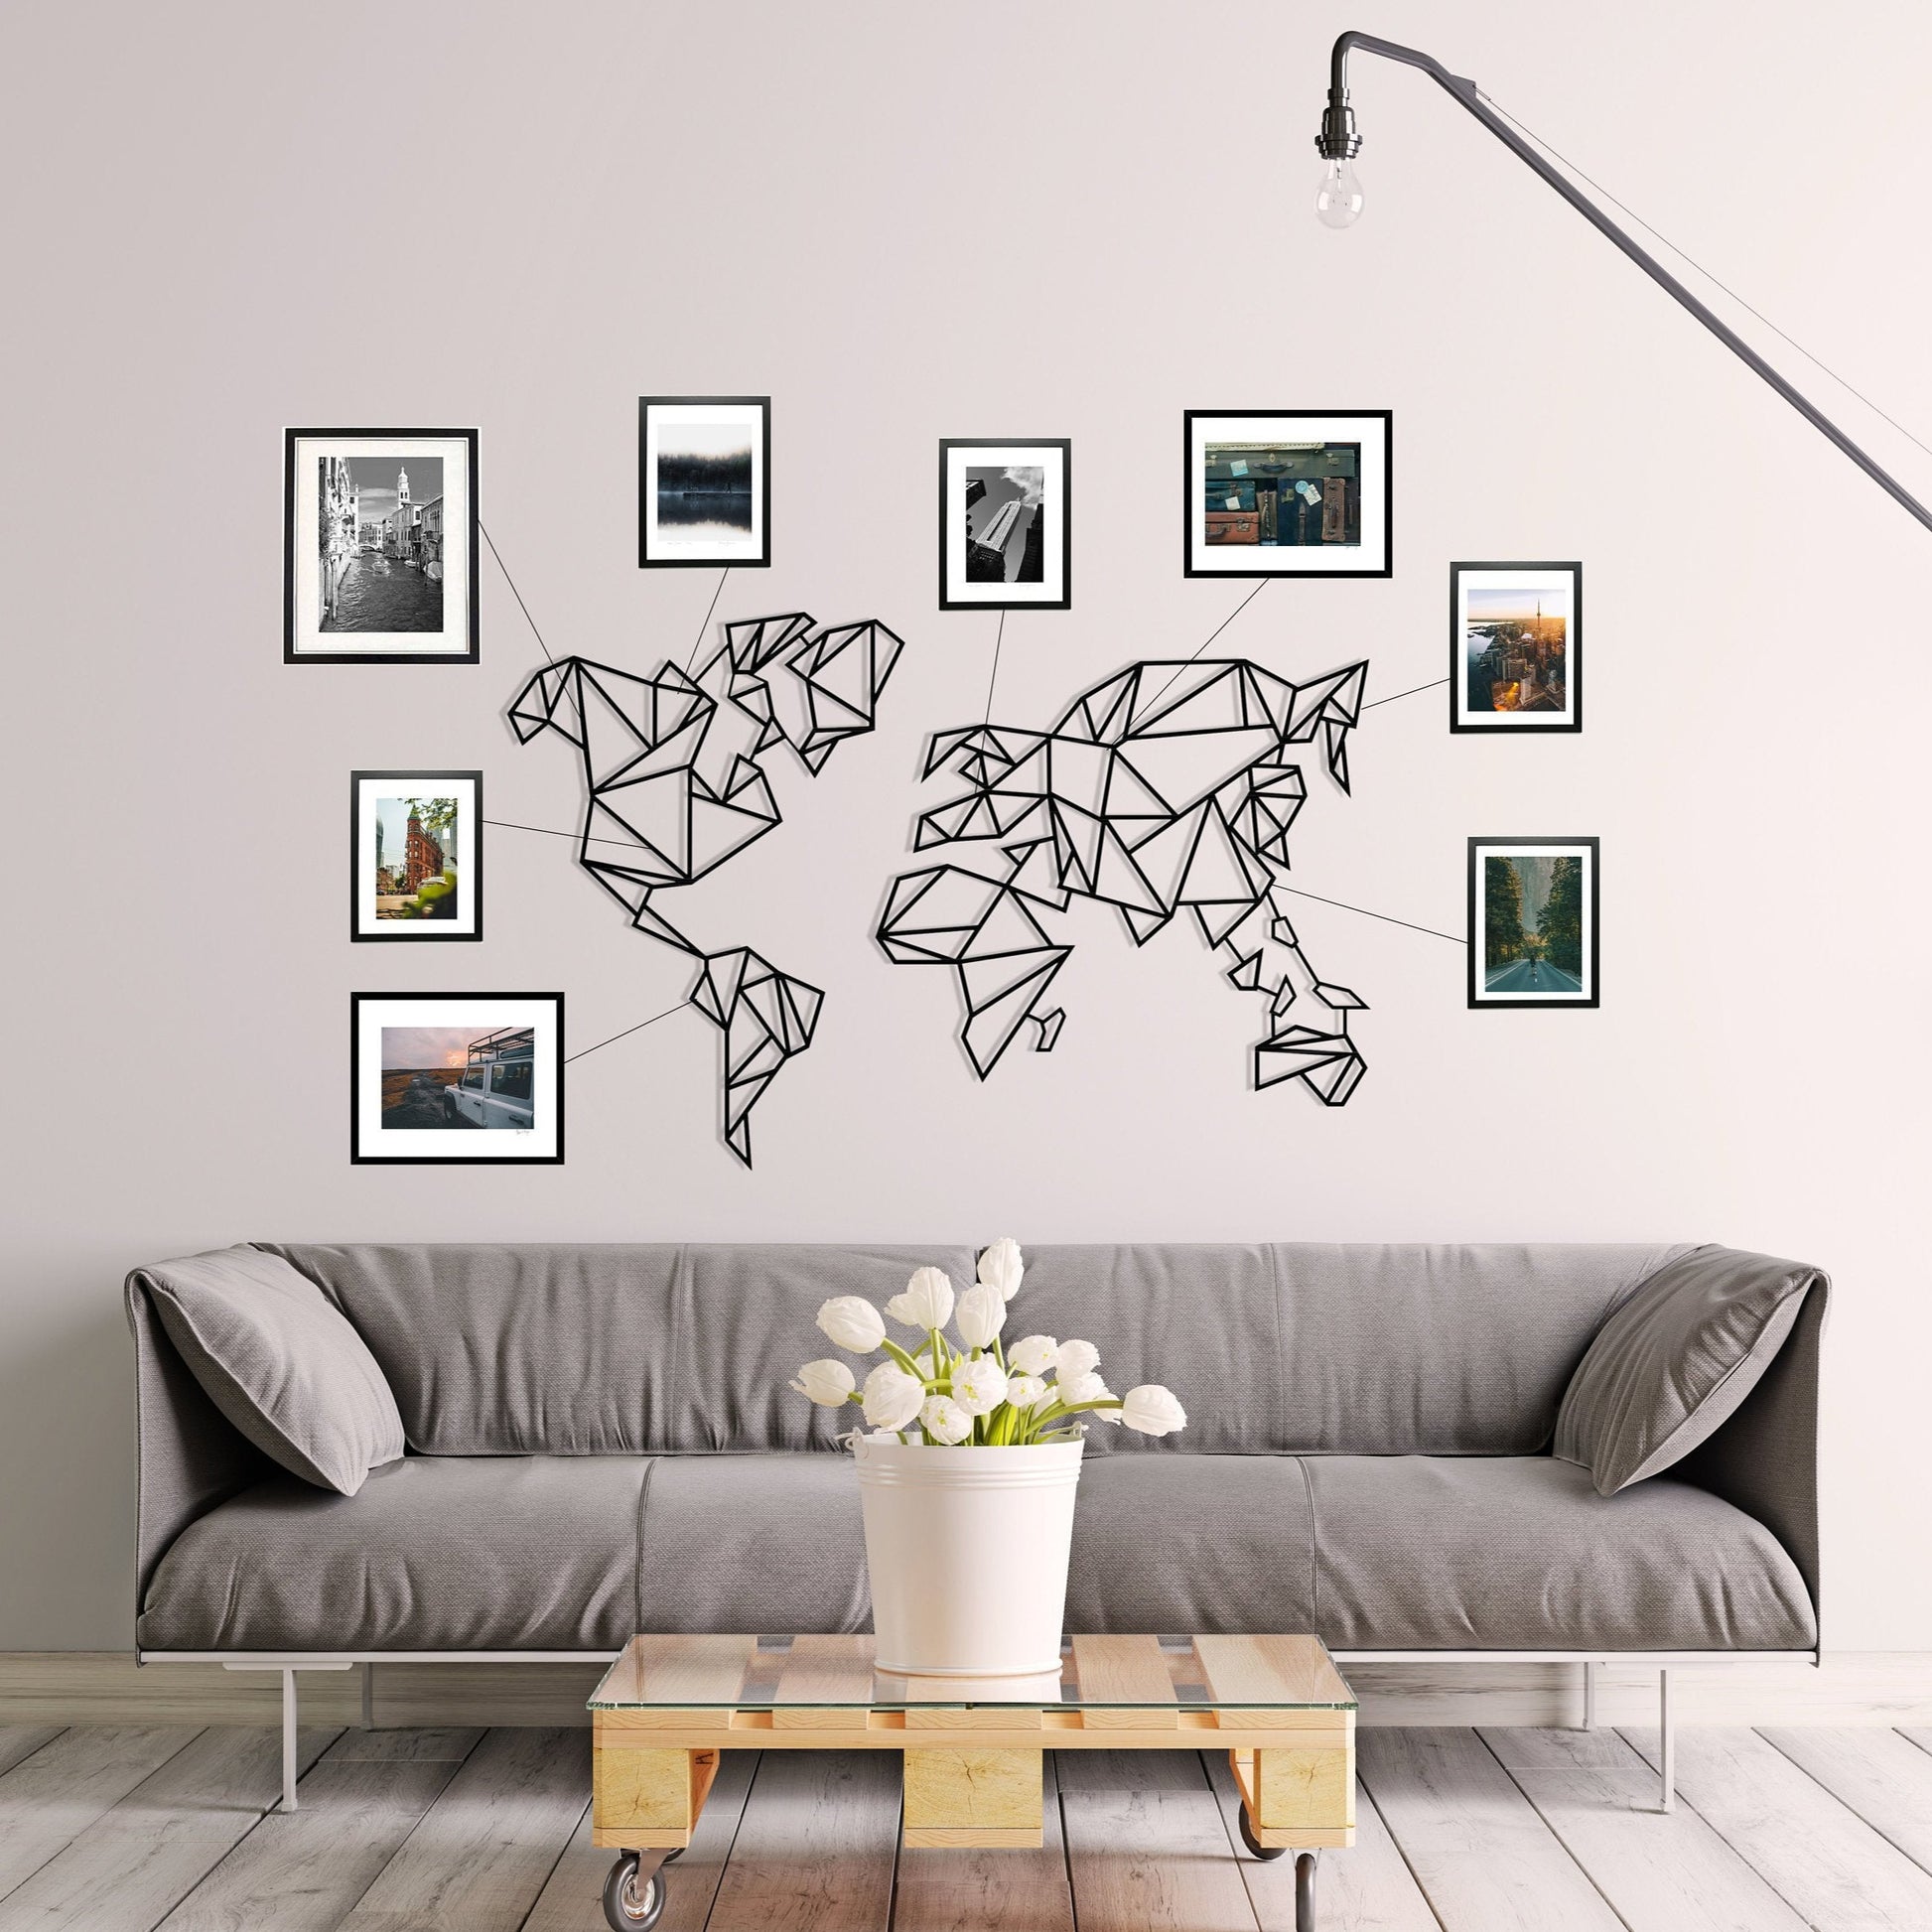 Black Metal World Map Wall Decor - Colorfullworlds – ColorfullWorlds